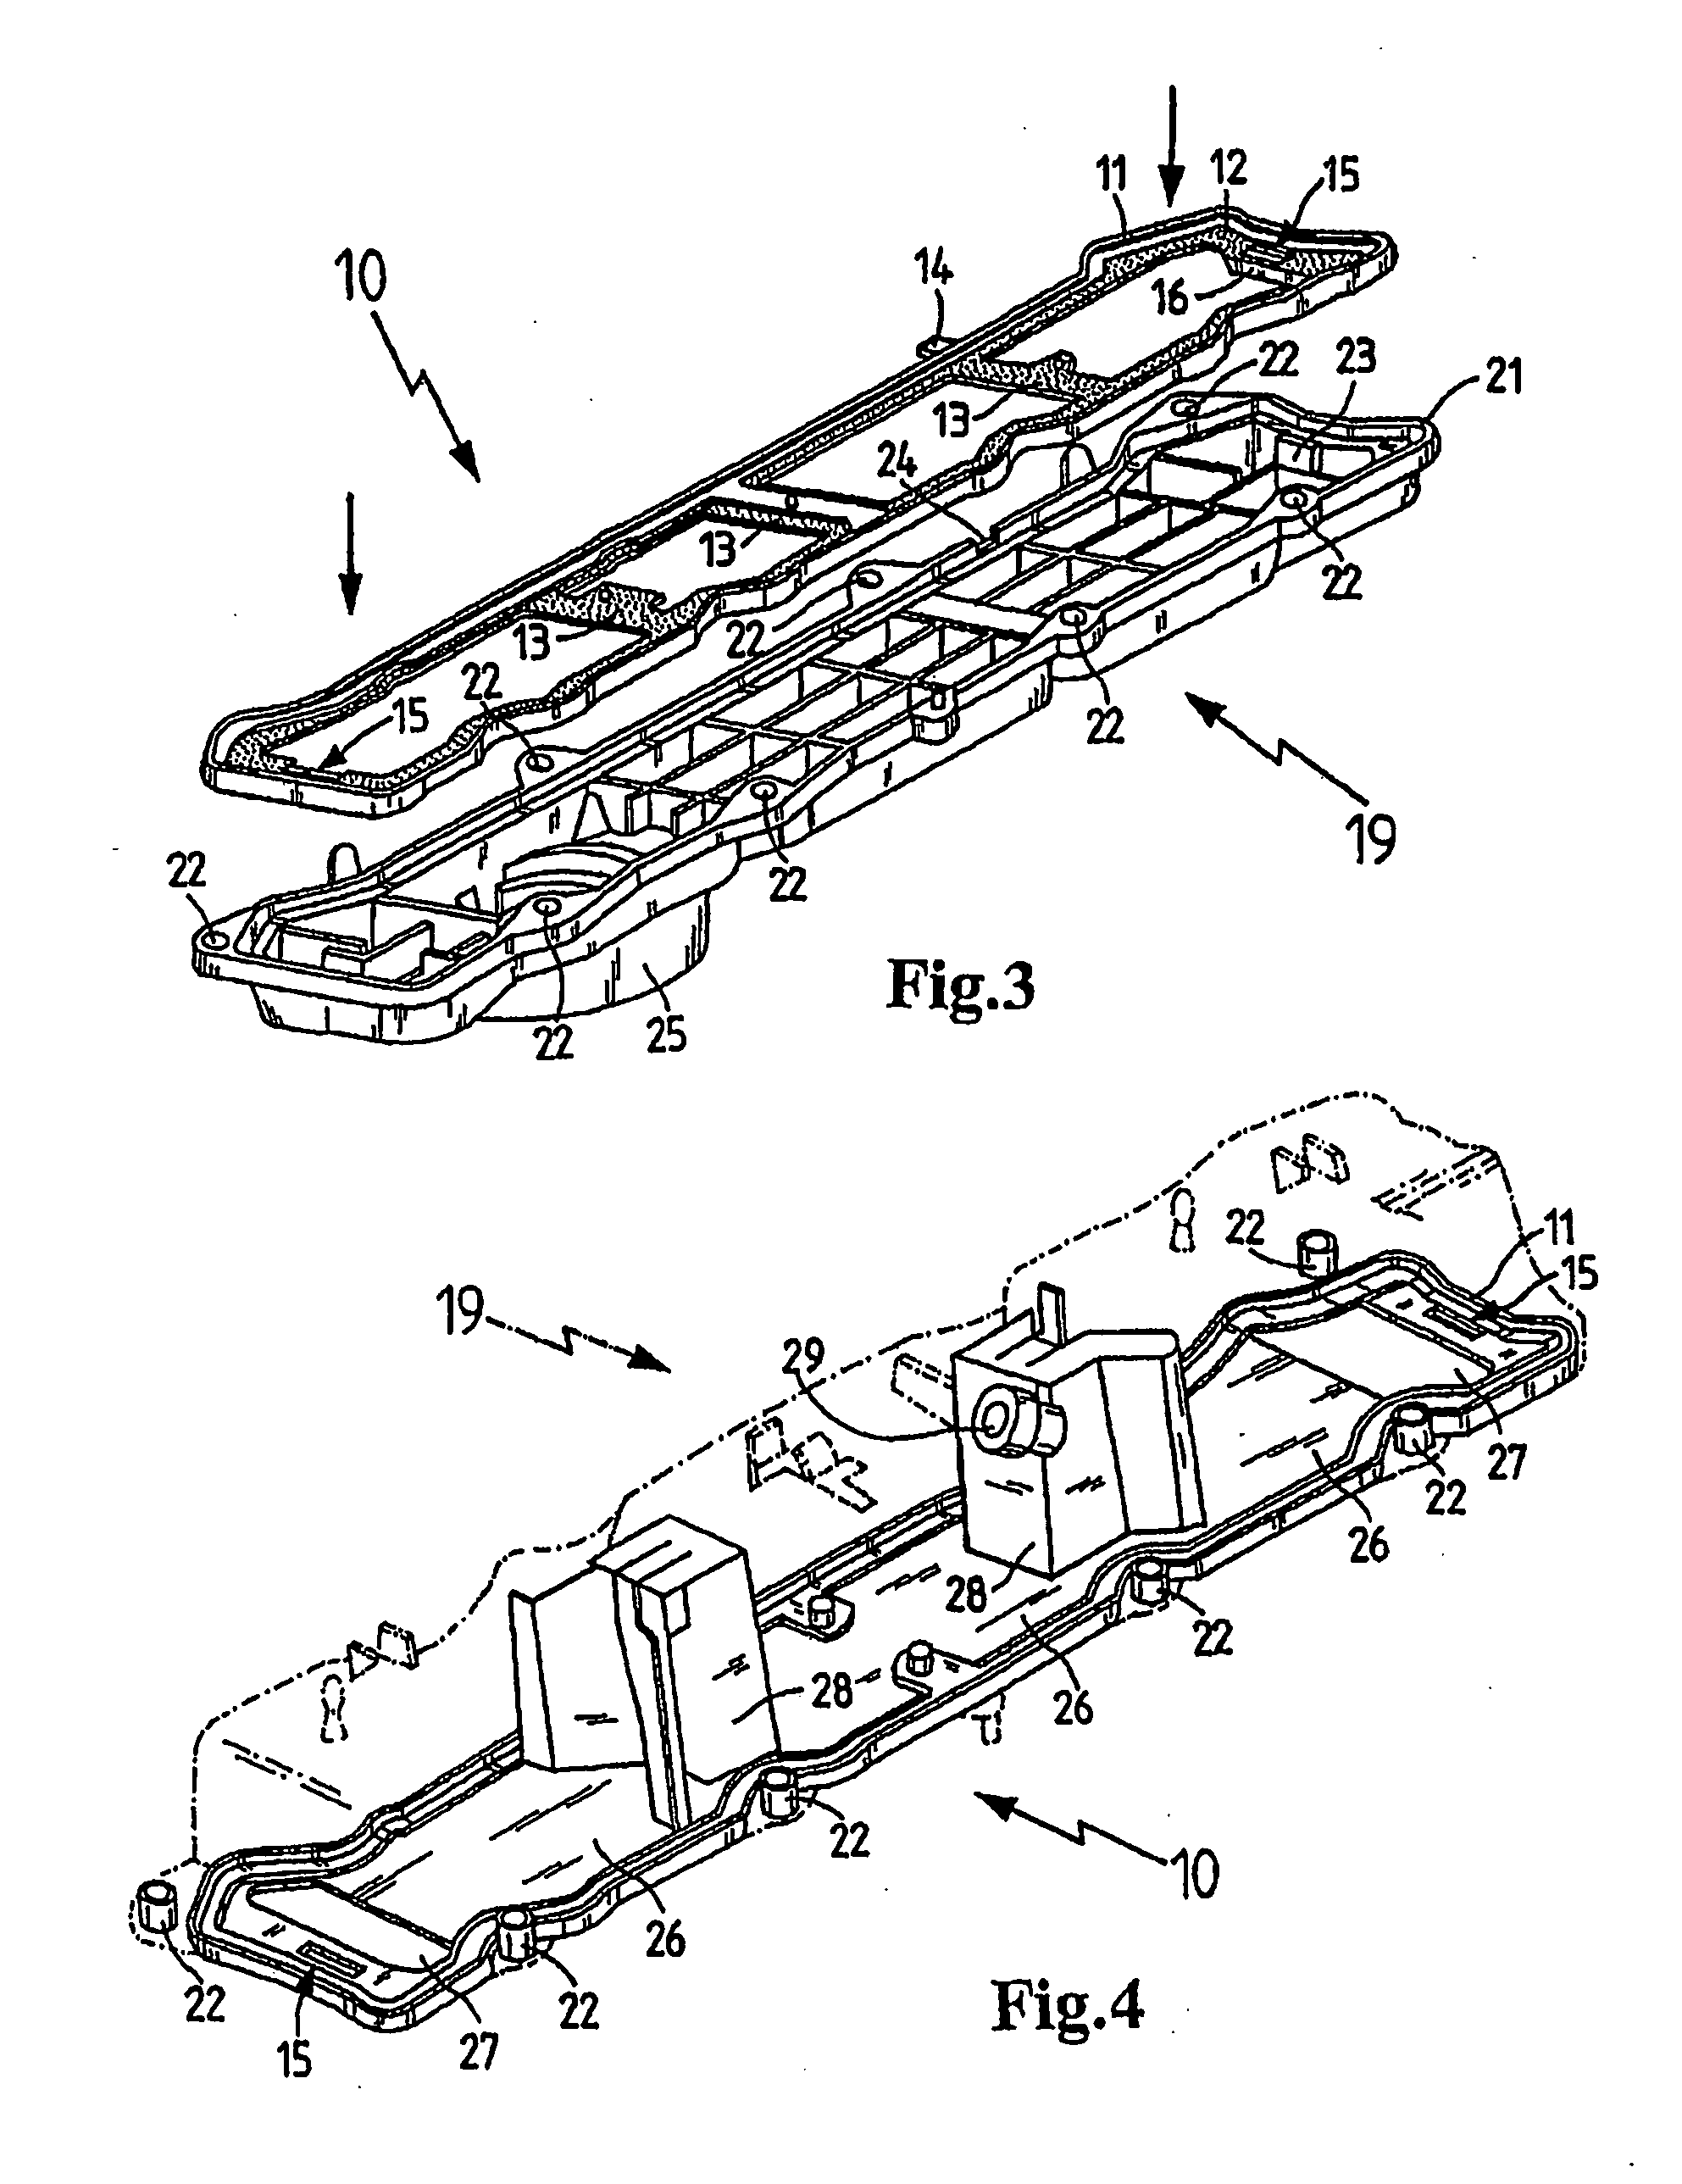 Gasket for sealing a connection between two molded parts